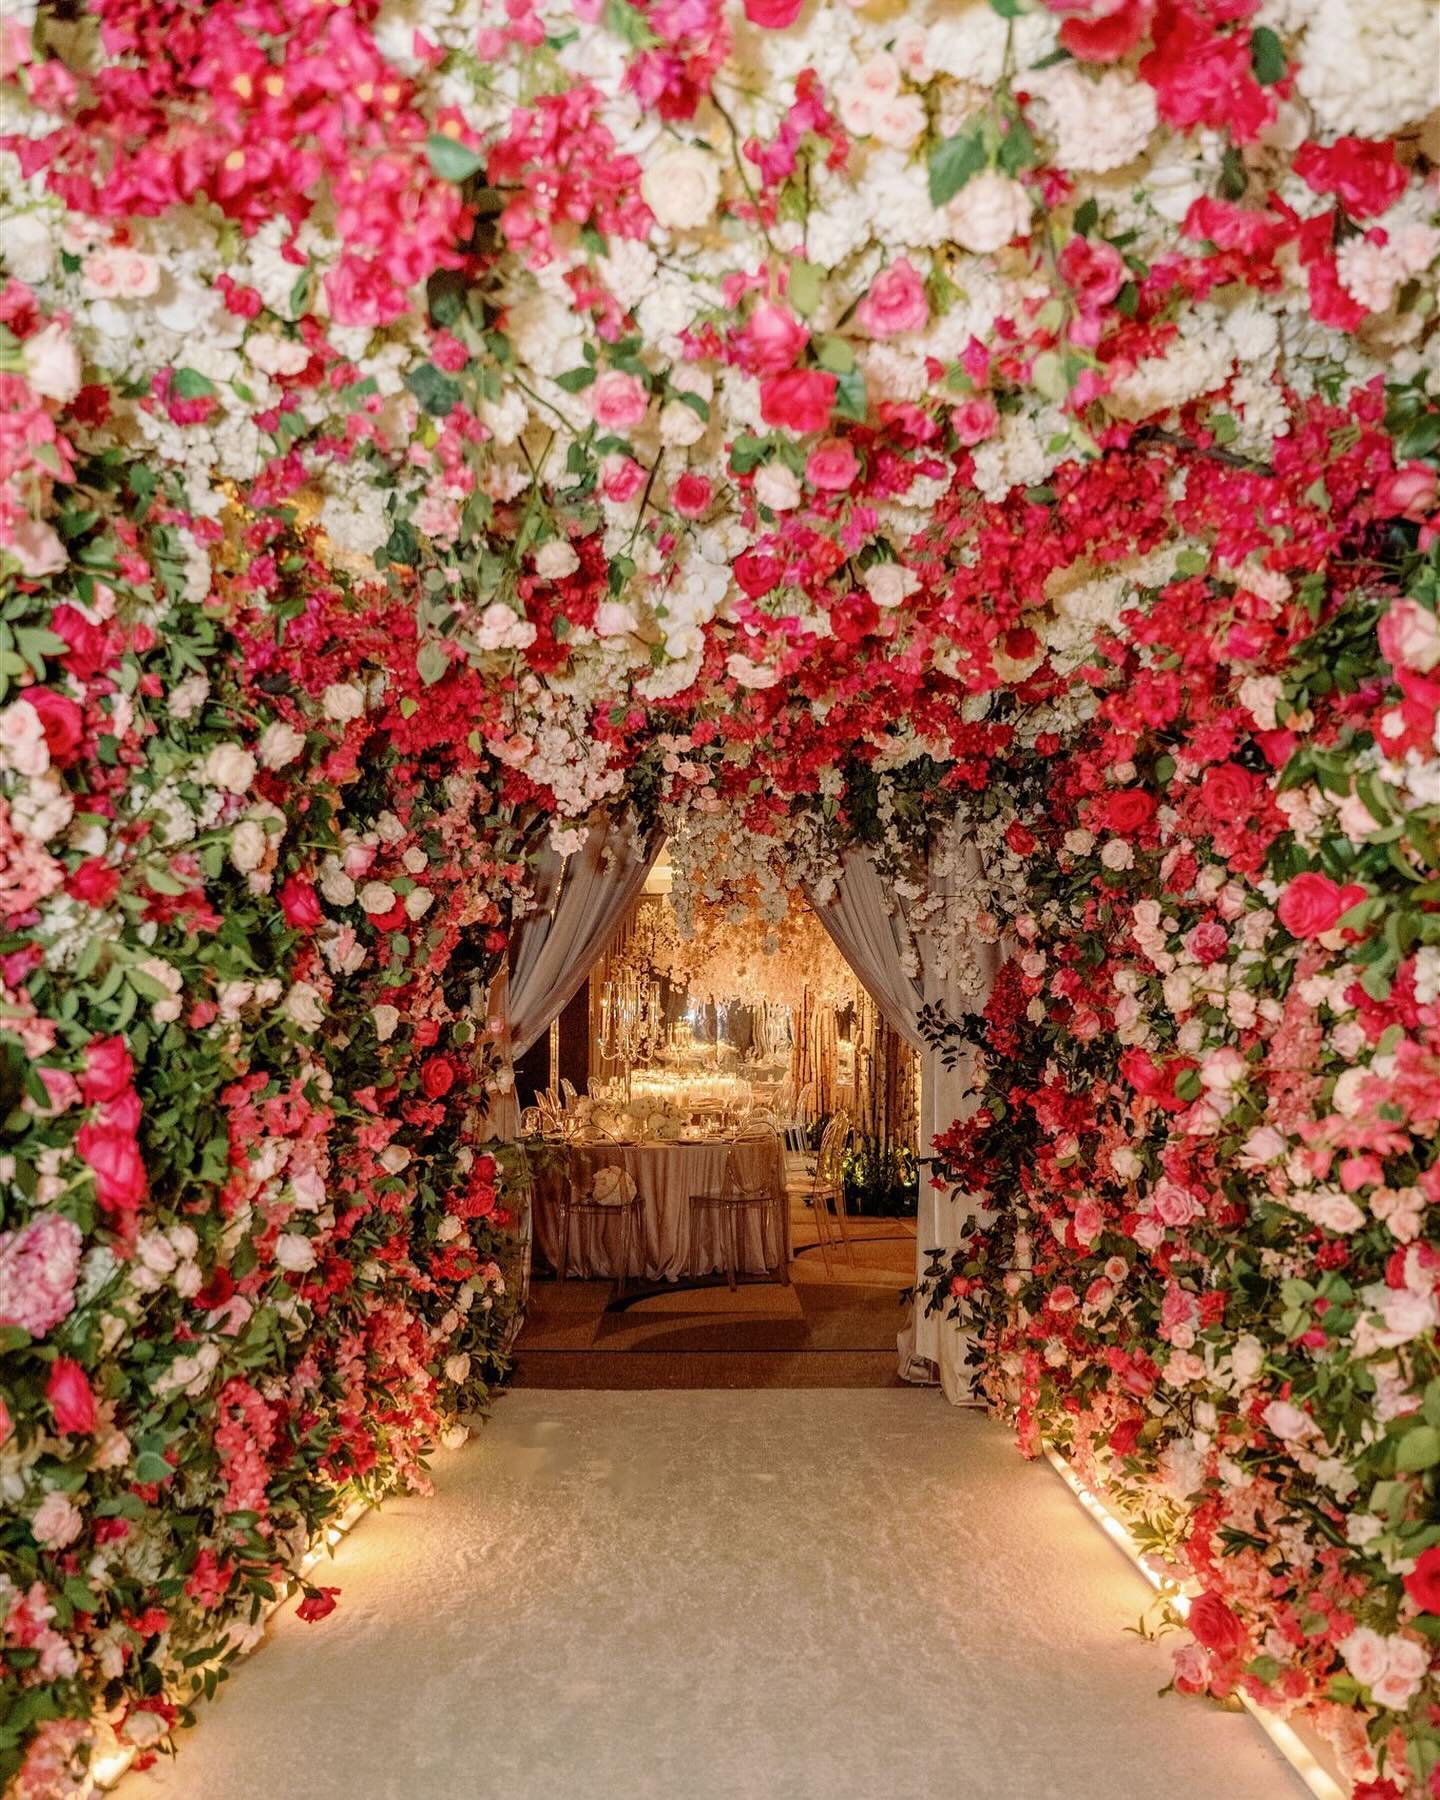 Follow the floral tunnel to create your dream wedding day details!✨
.
.
.
Planning: @engagedeventsdesigns 
Photographer: @albarose.co 
Videographer: @unleashedvizuals 
Venue: @thejouledallas 
DJ: @abowtieaffairllc 
Florist/Rentals: @grodesigns 
Light